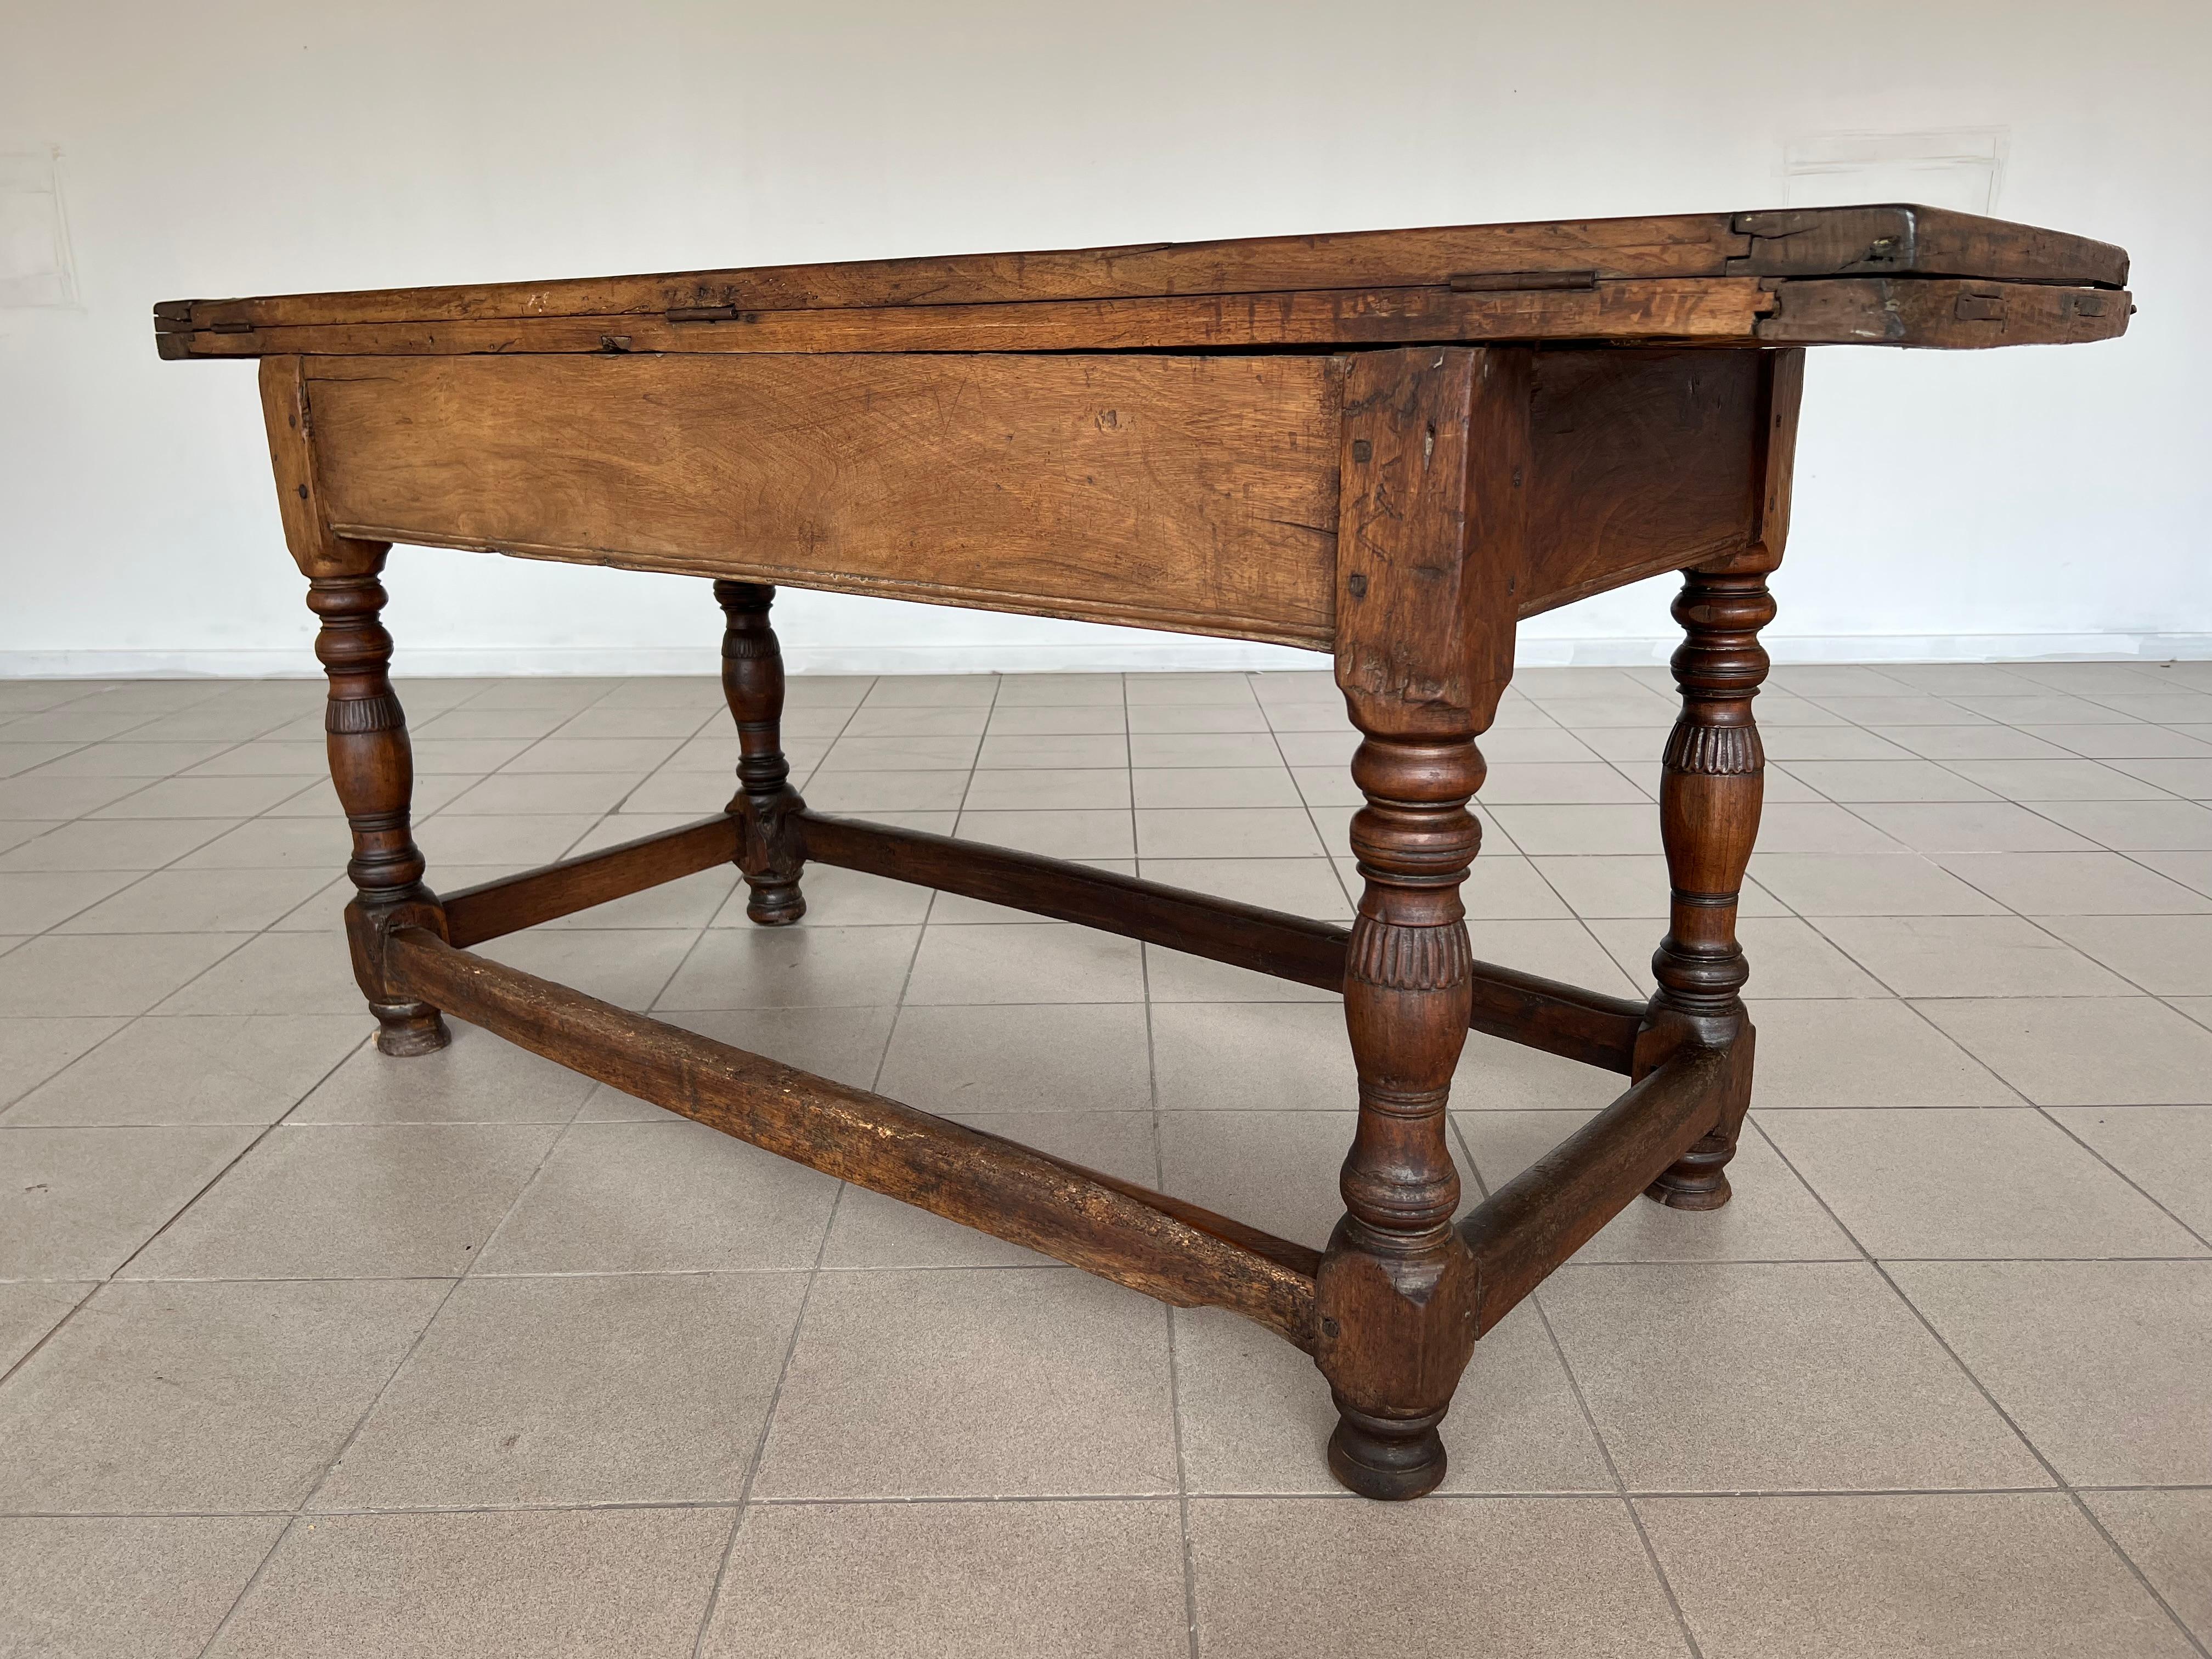 Rare 18c Swiss French Alp Rustic Flip Top Dining Table or Desk With Two Drawers For Sale 13